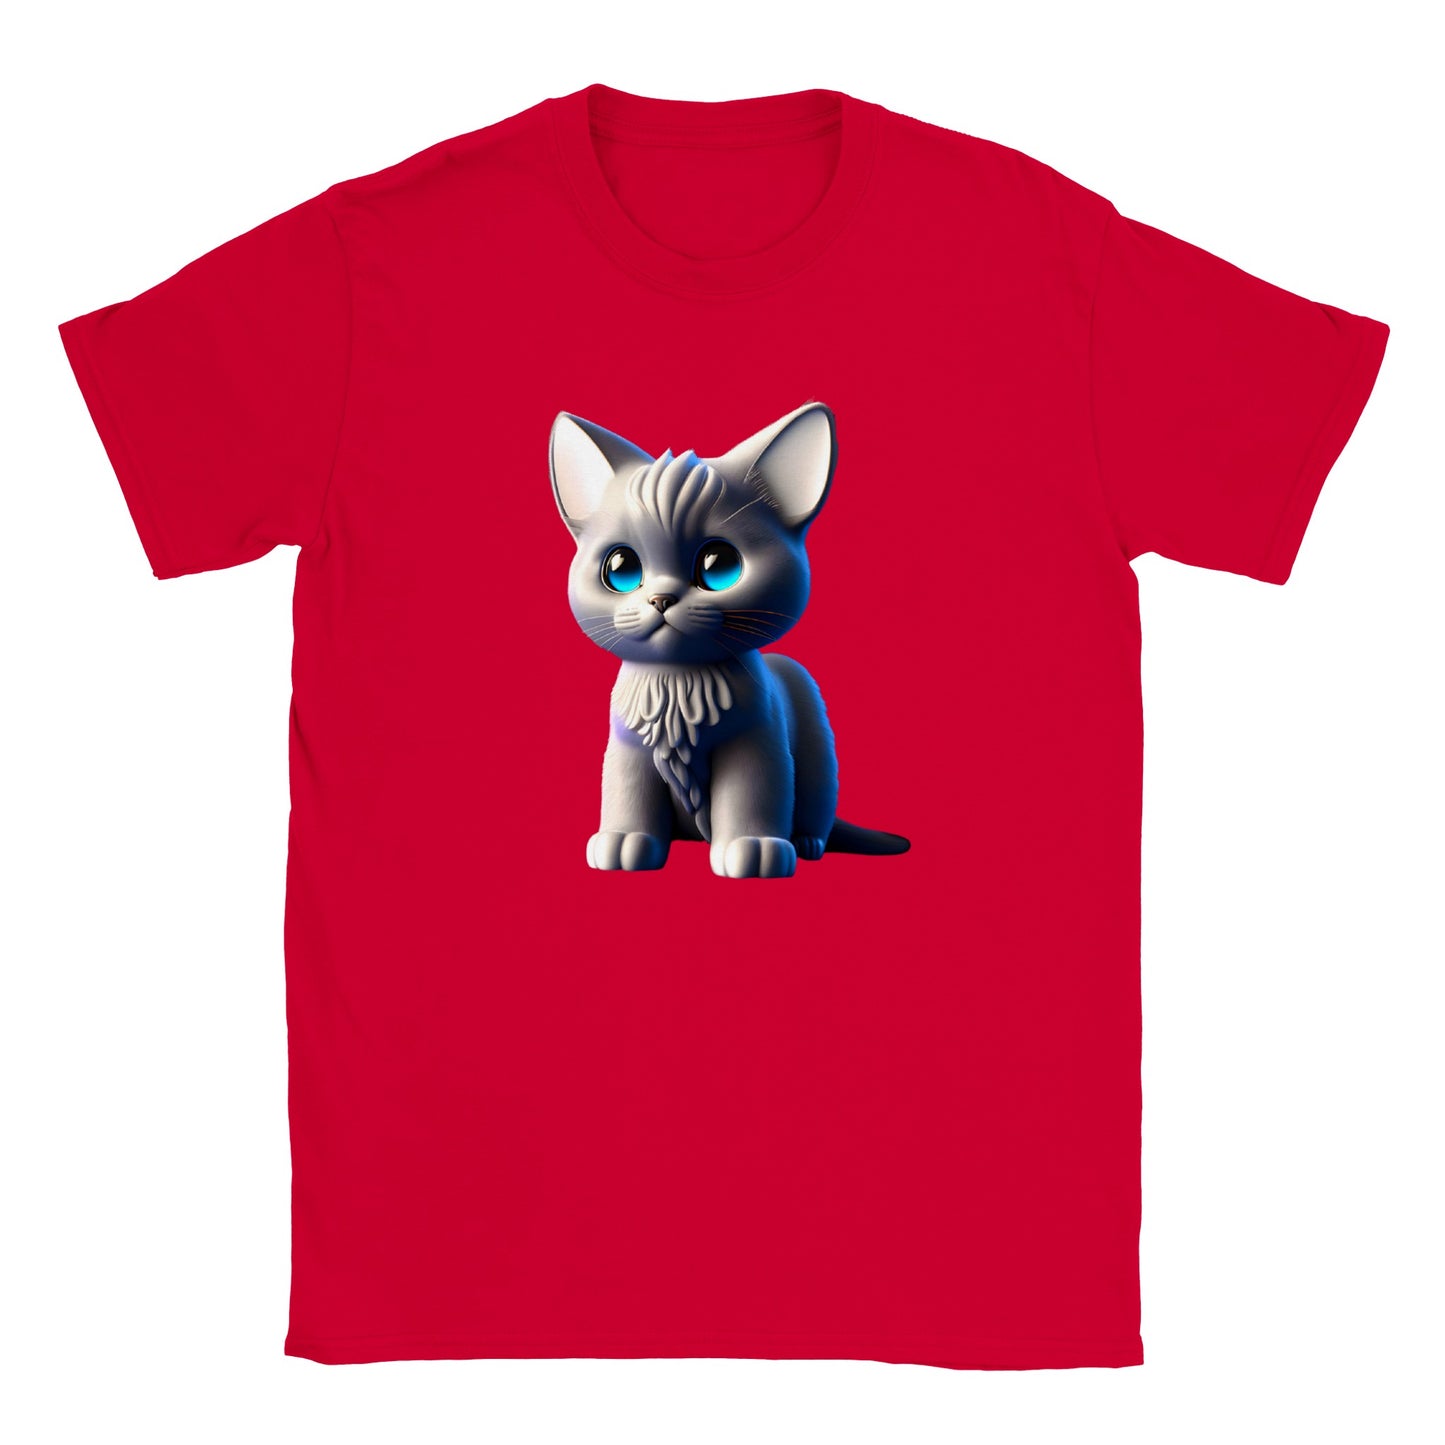 Adorable, Cool, Cute Cats and Kittens Toy - Classic Kids Crewneck T-Shirt 36